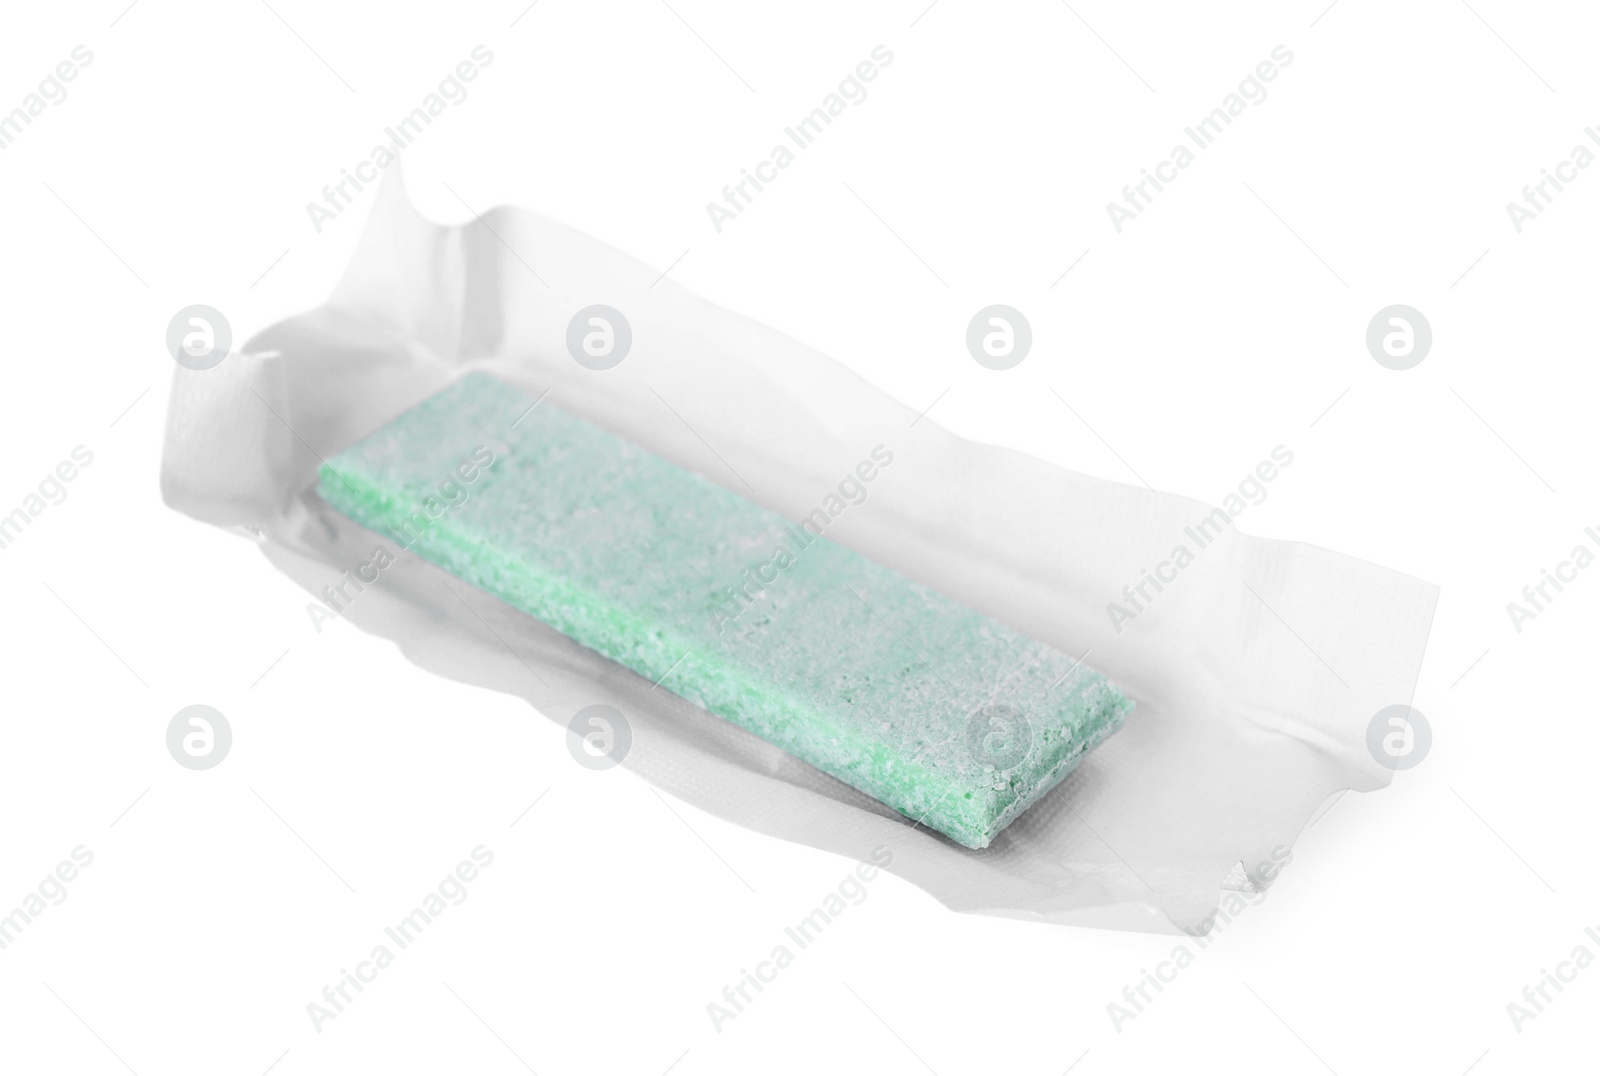 Photo of Unwrapped stick of chewing gum isolated on white